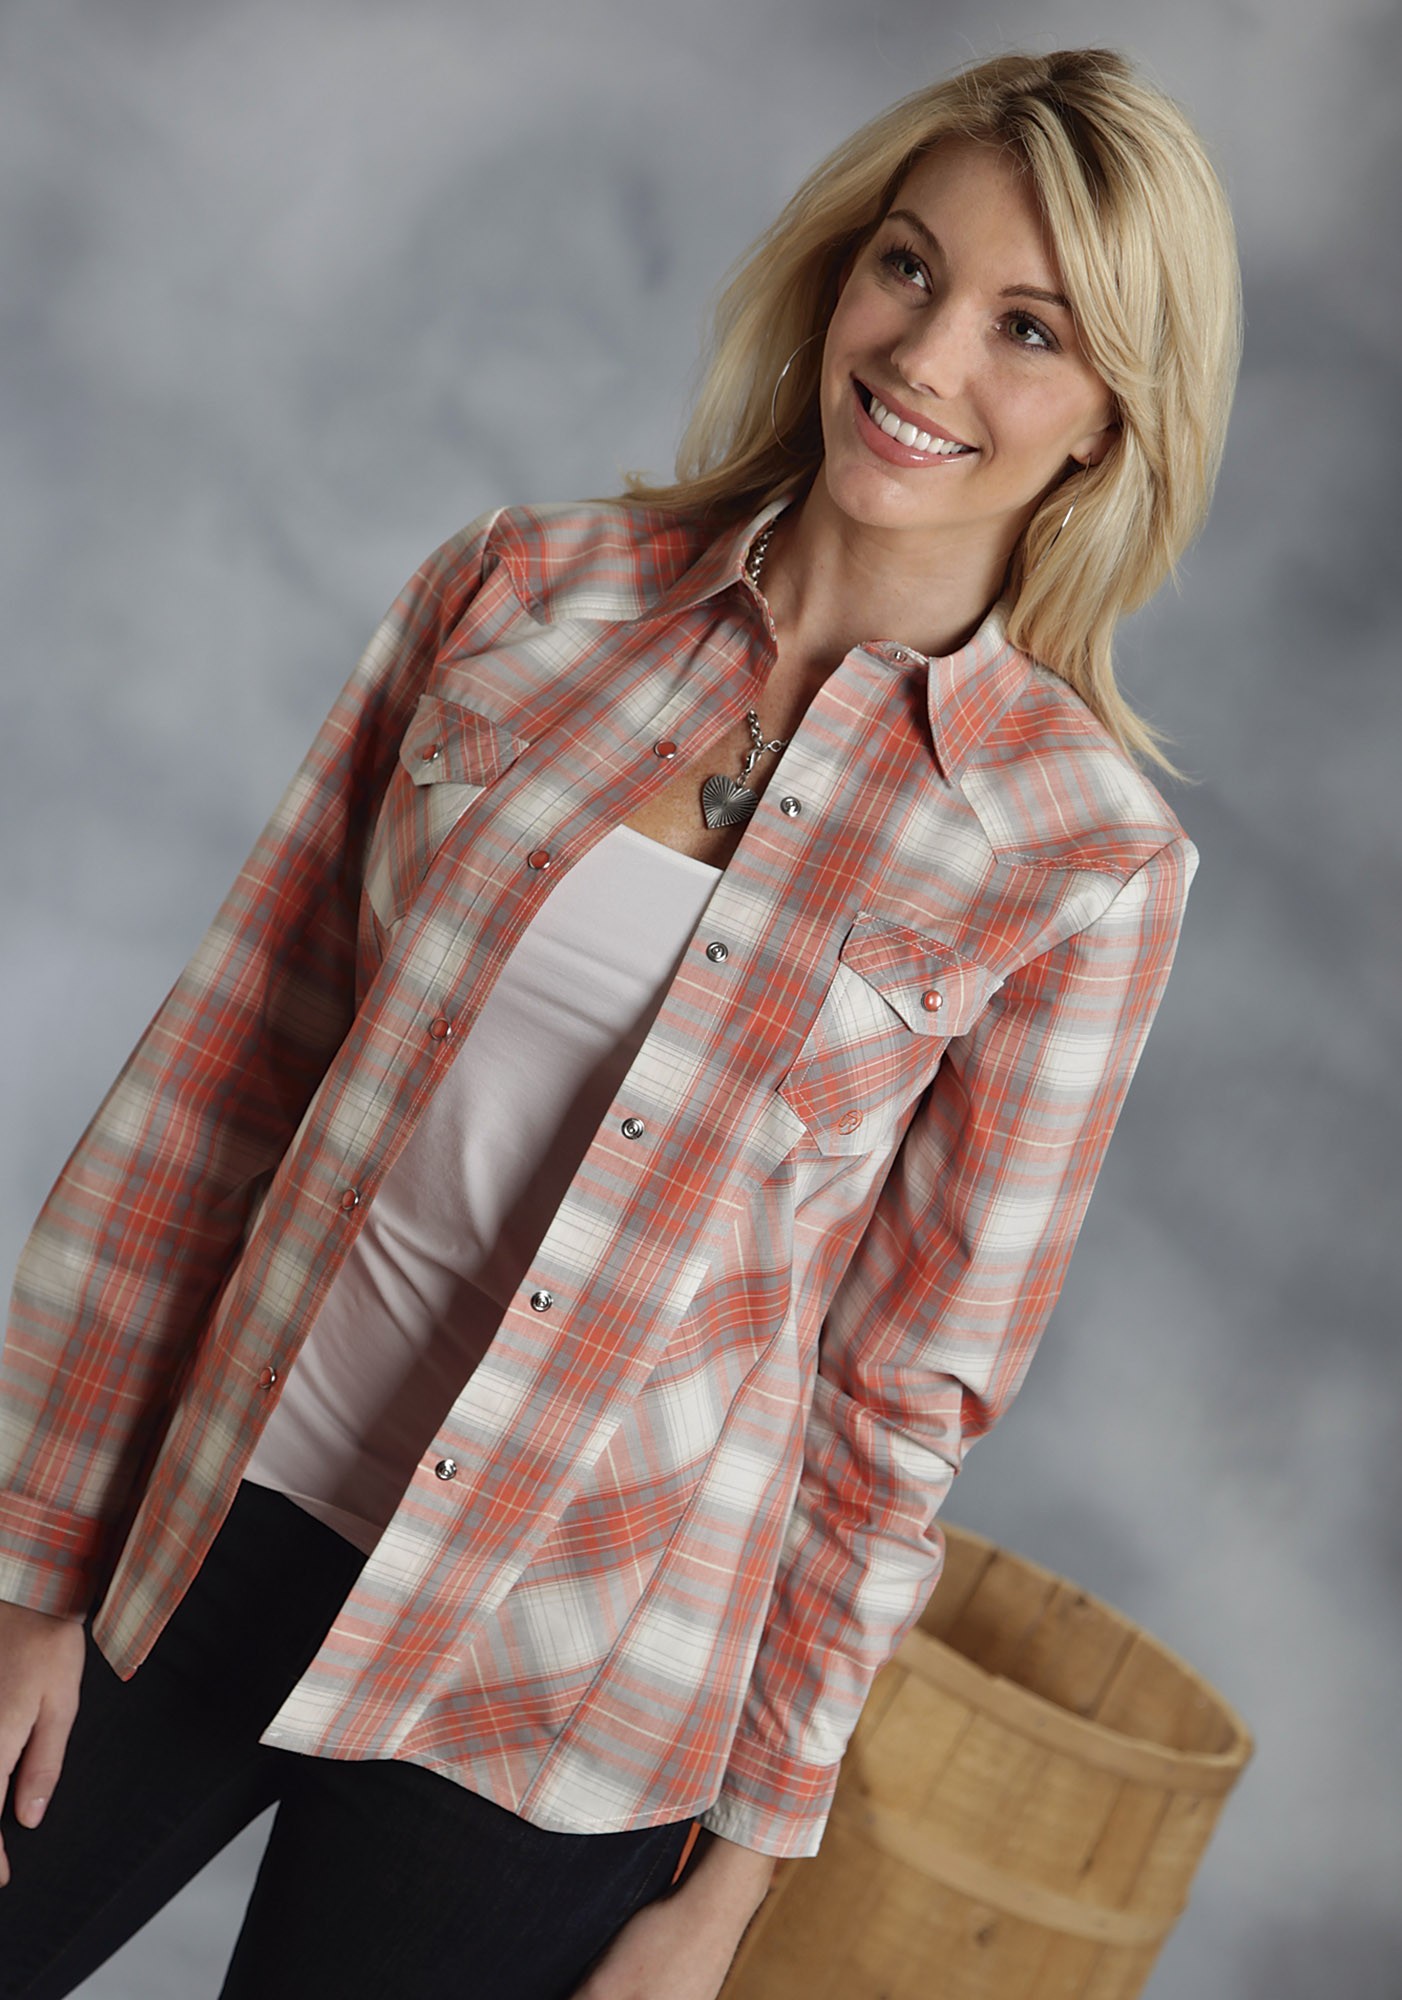 How to style an orange flannel ...